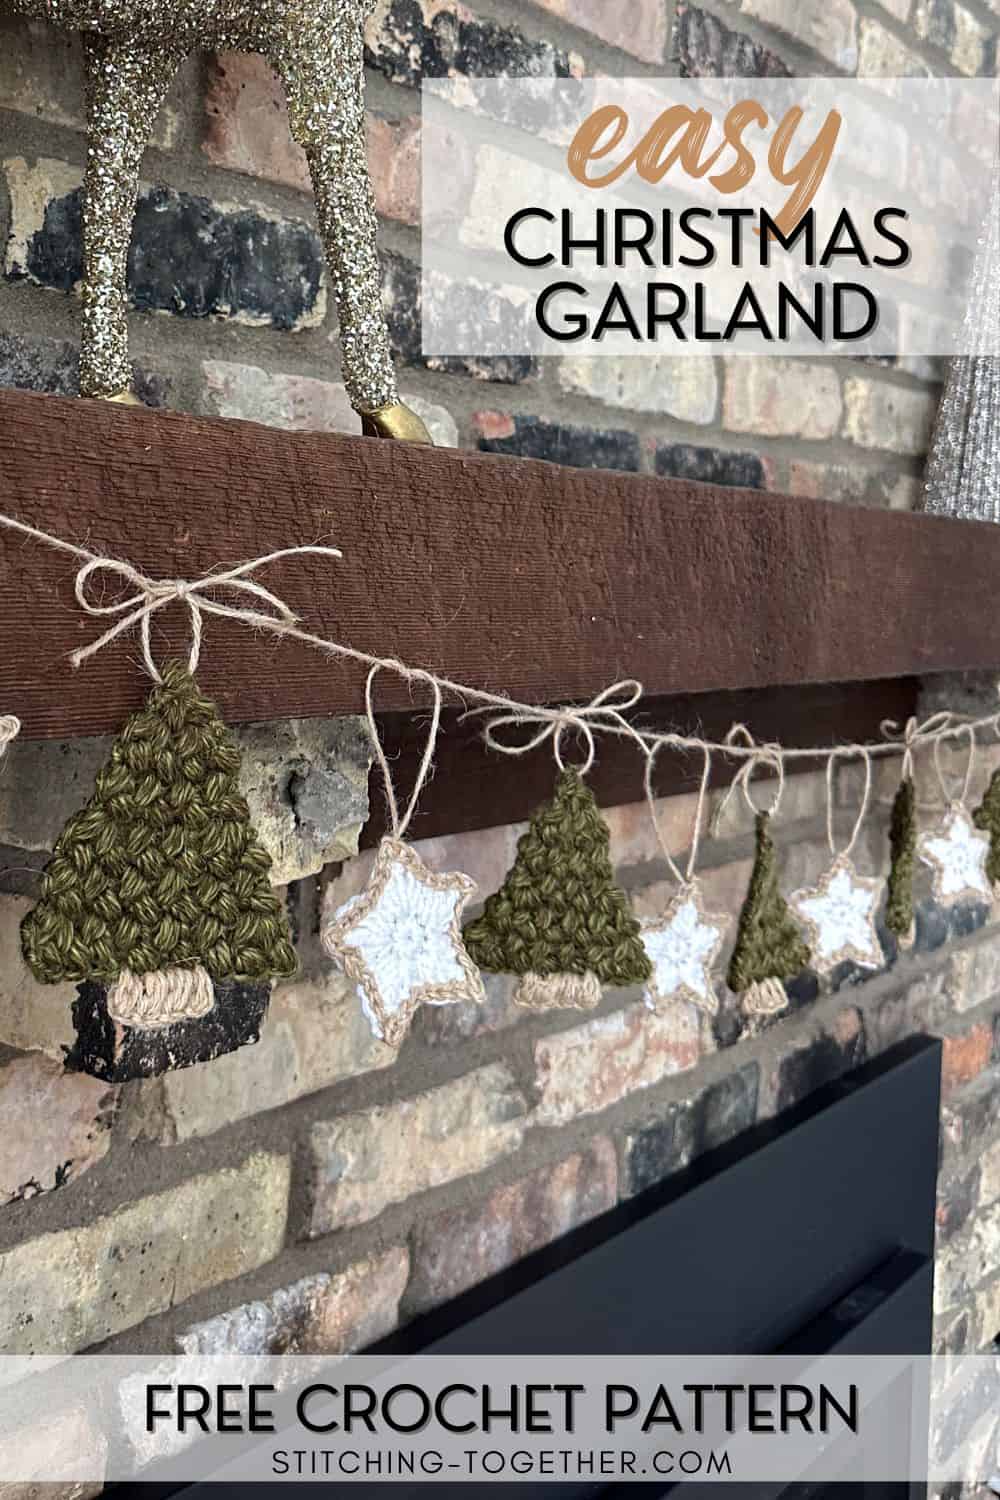 close up of crochet christmas garland with trees and stars and text overlay reading "easy christmas garland free crochet pattern"